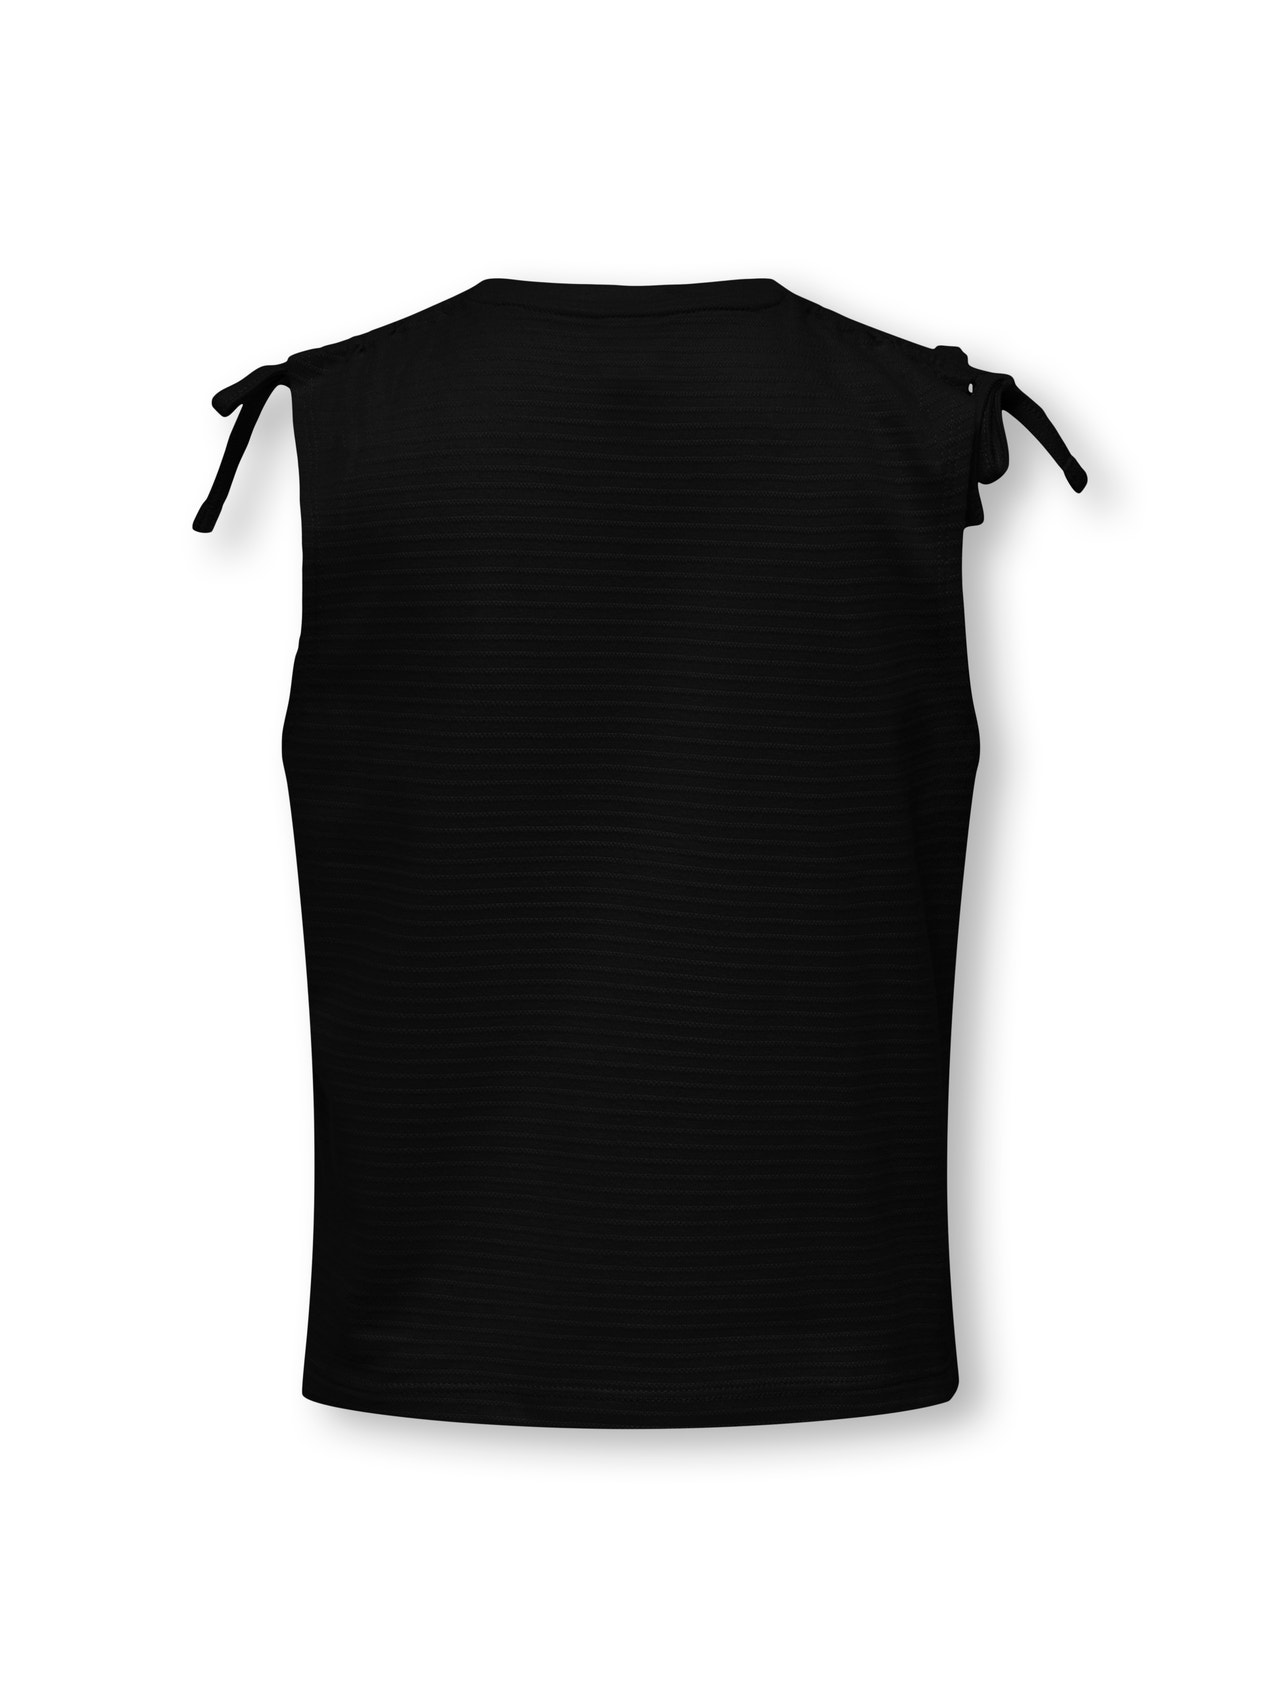 ONLY Top With String Details -Black - 15295241